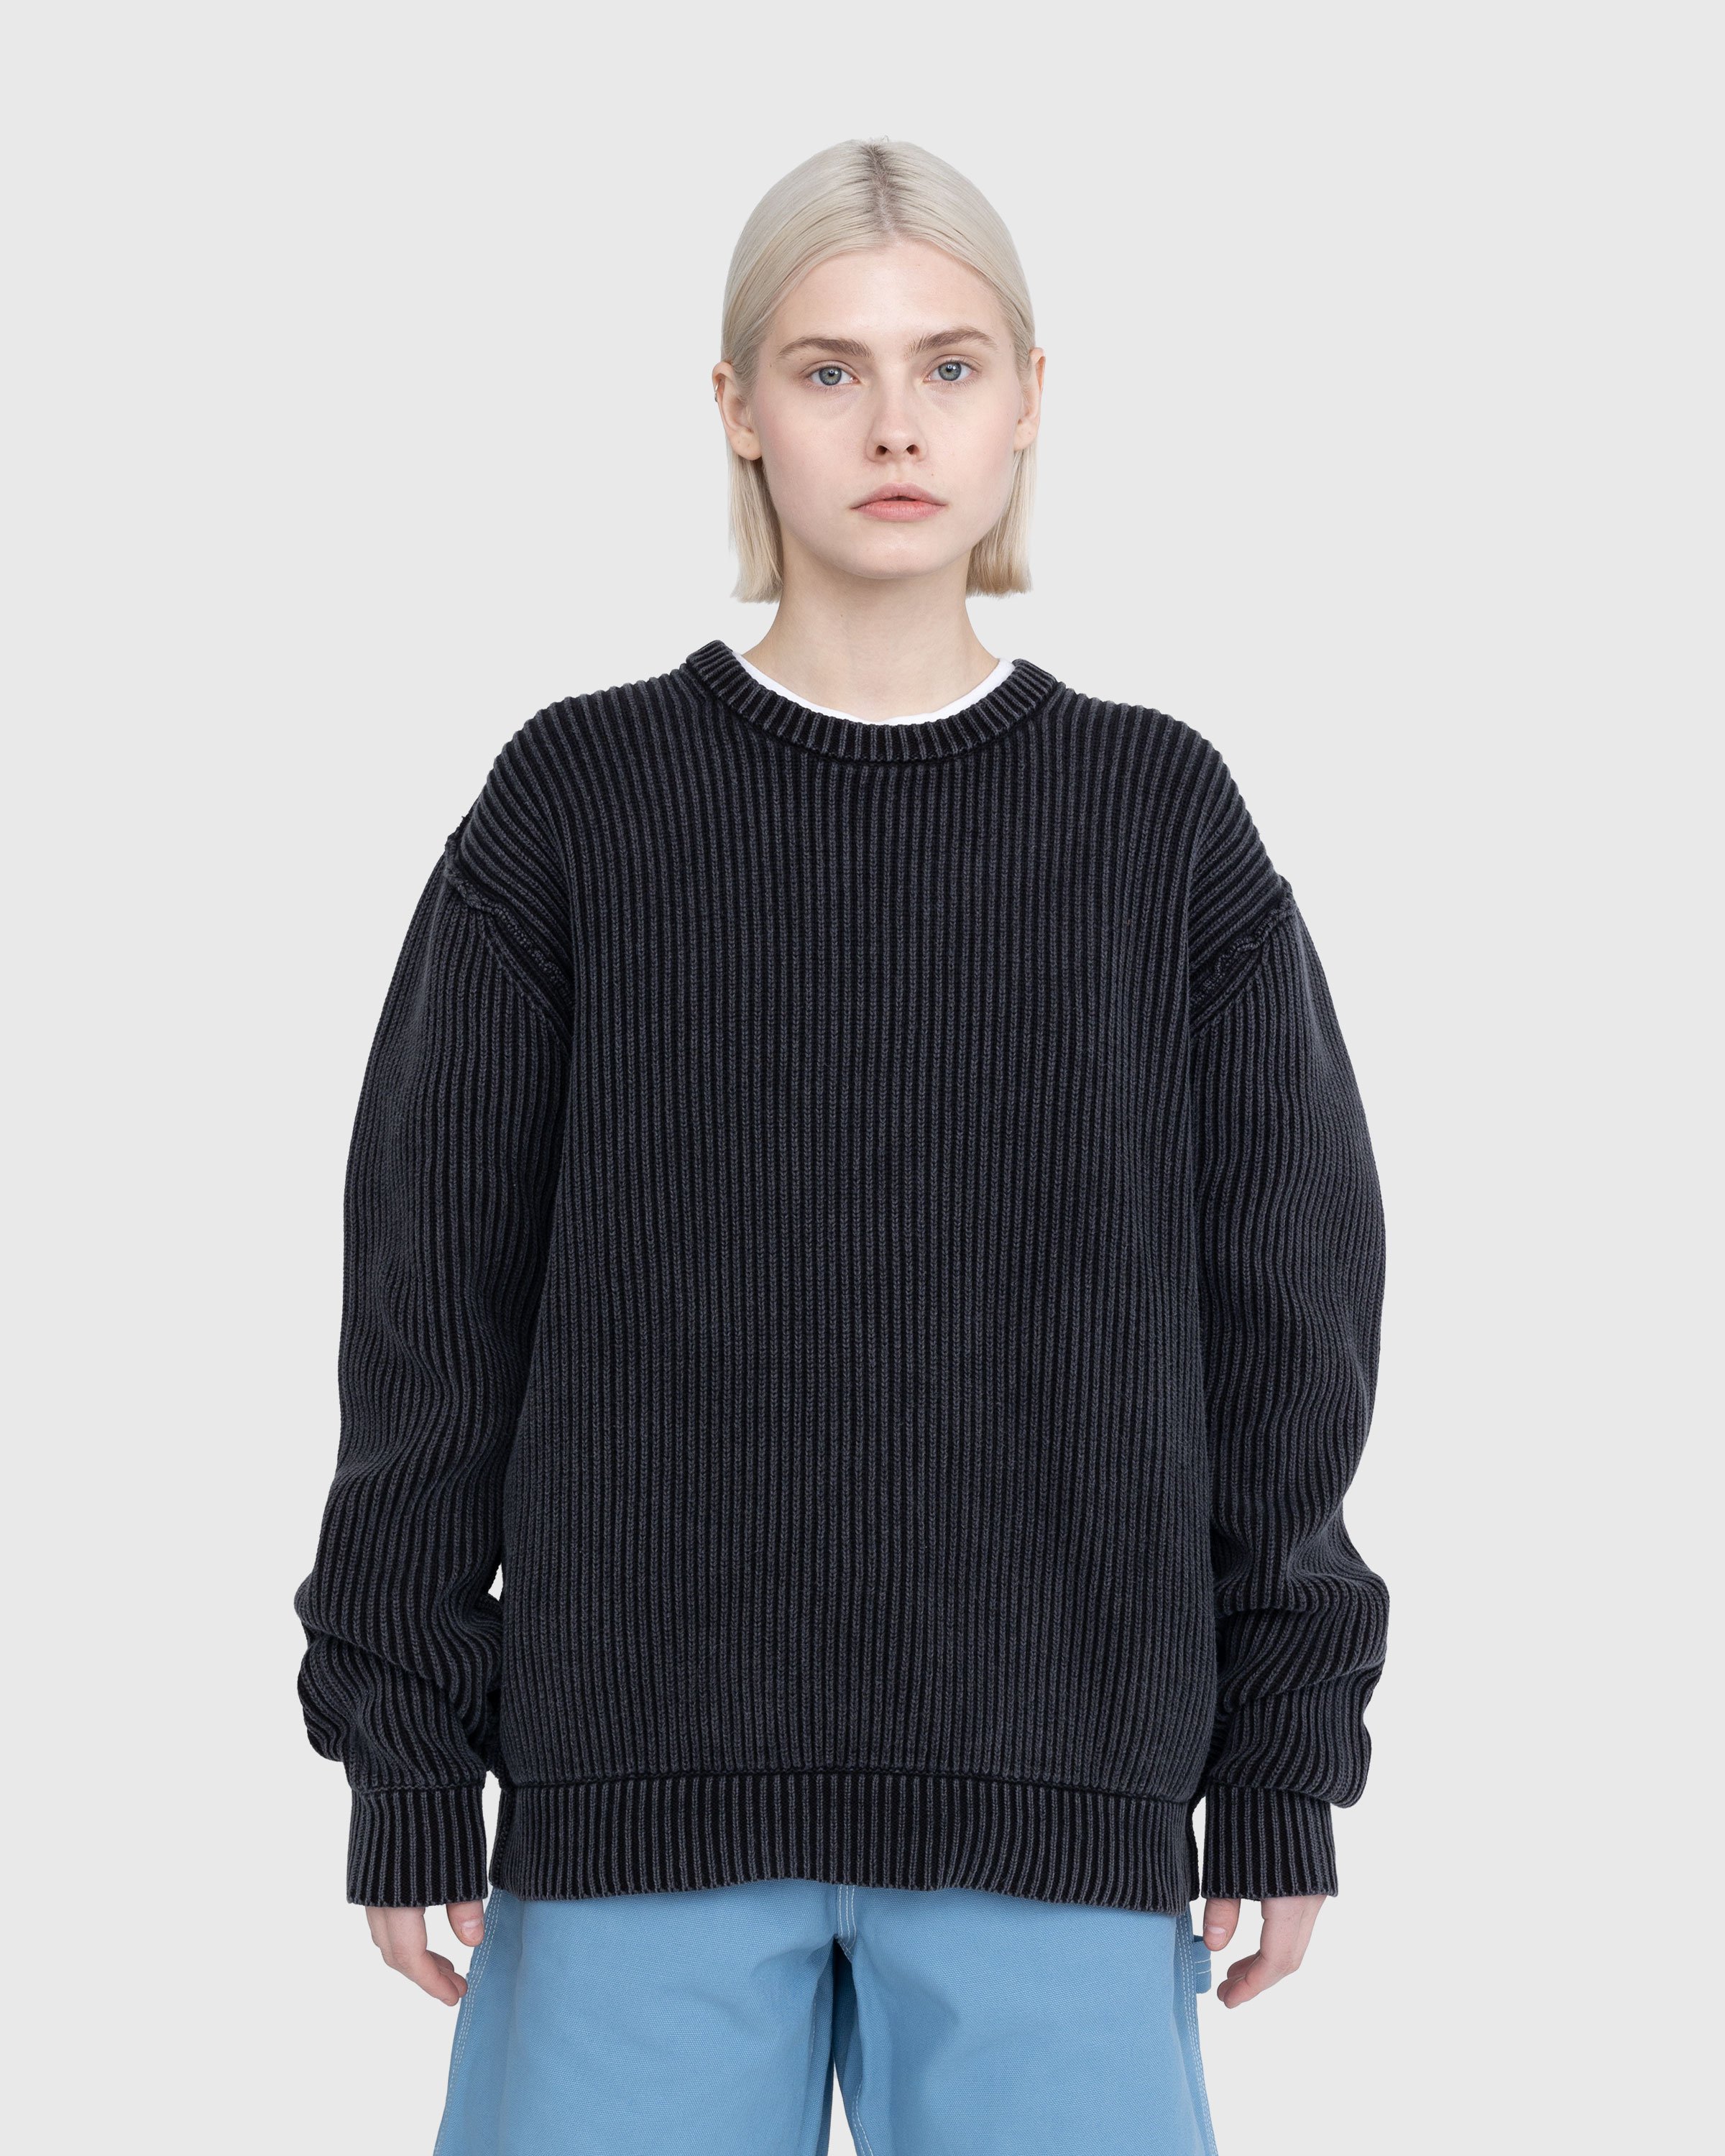 Highsnobiety - Pigment Dyed Loose Knit Sweater Black - Clothing - Black - Image 6